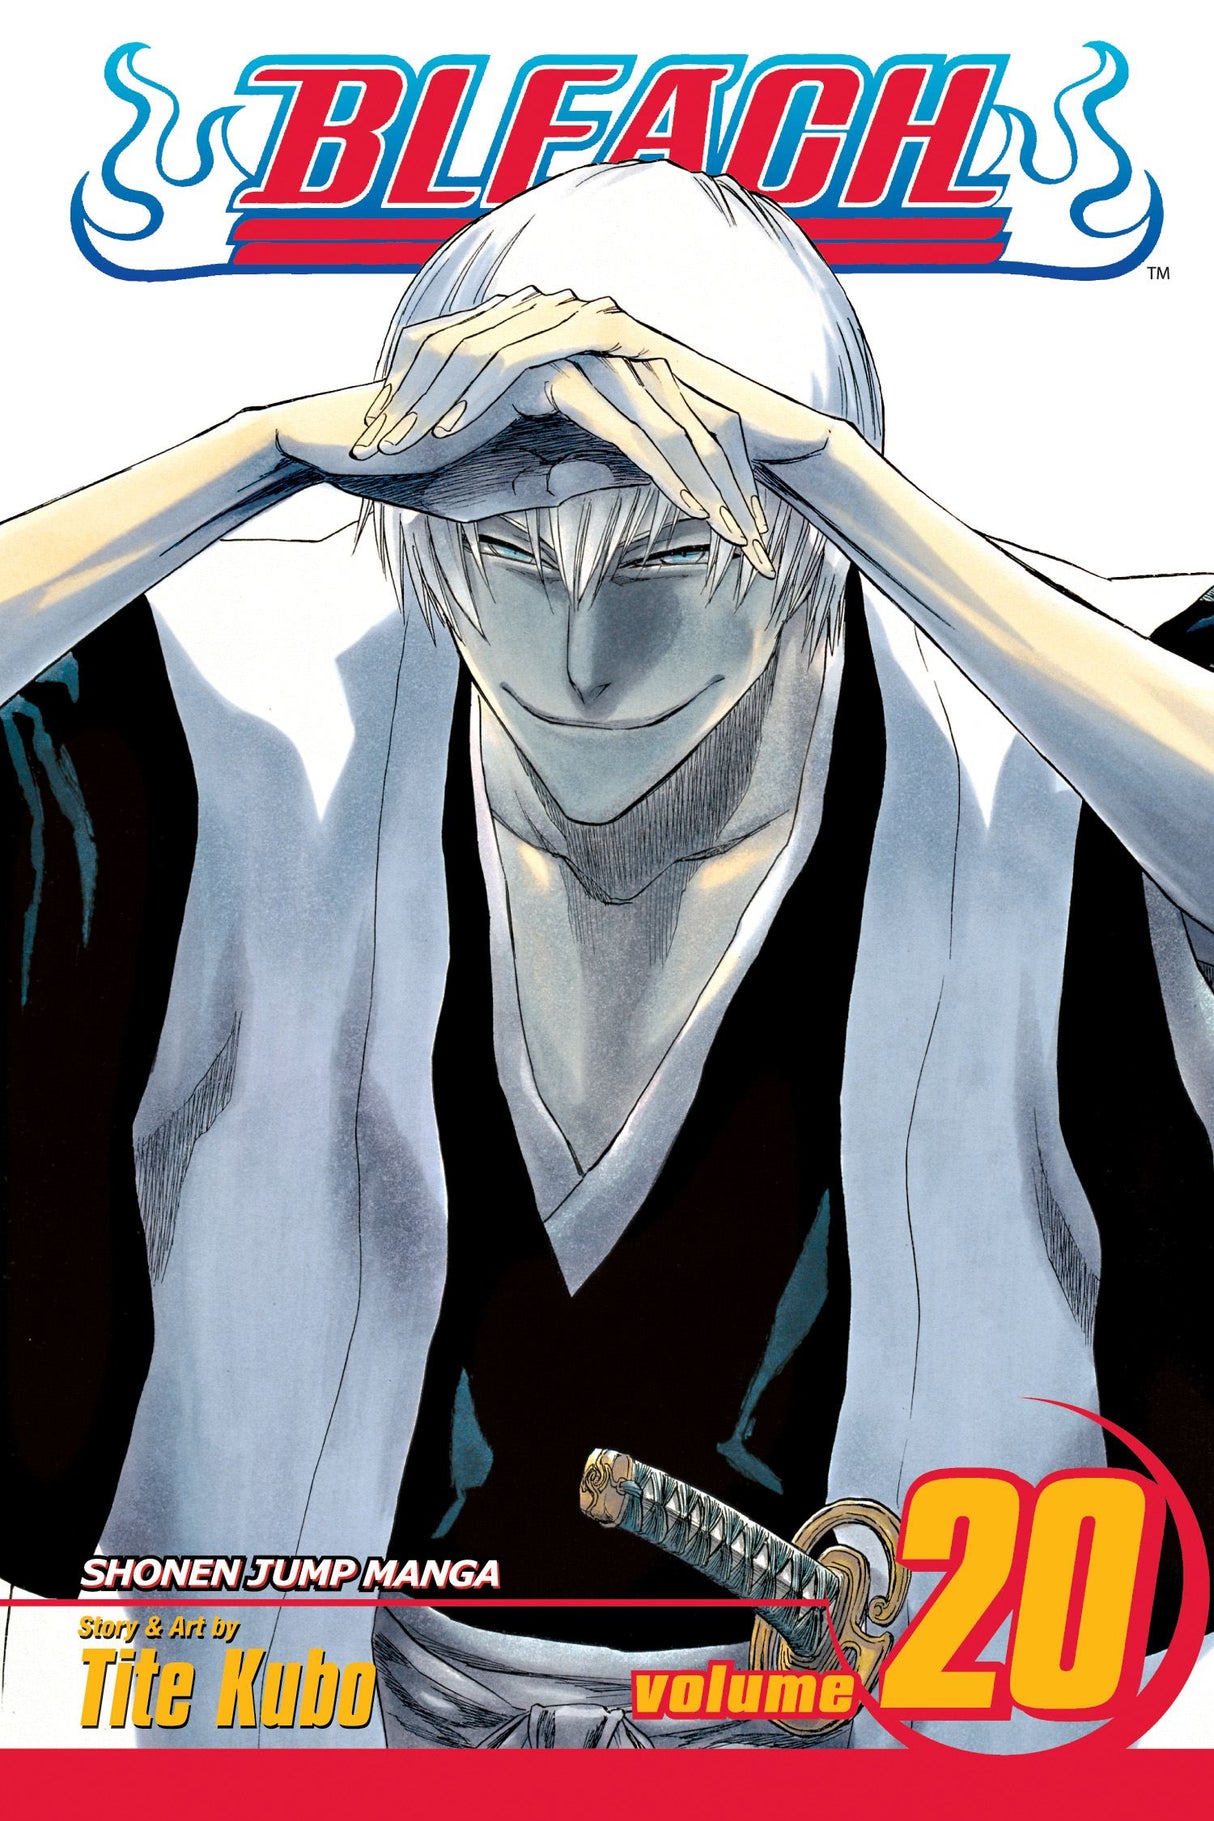 Cover image of the Manga Bleach, Vol. 20: End of Hypnosis